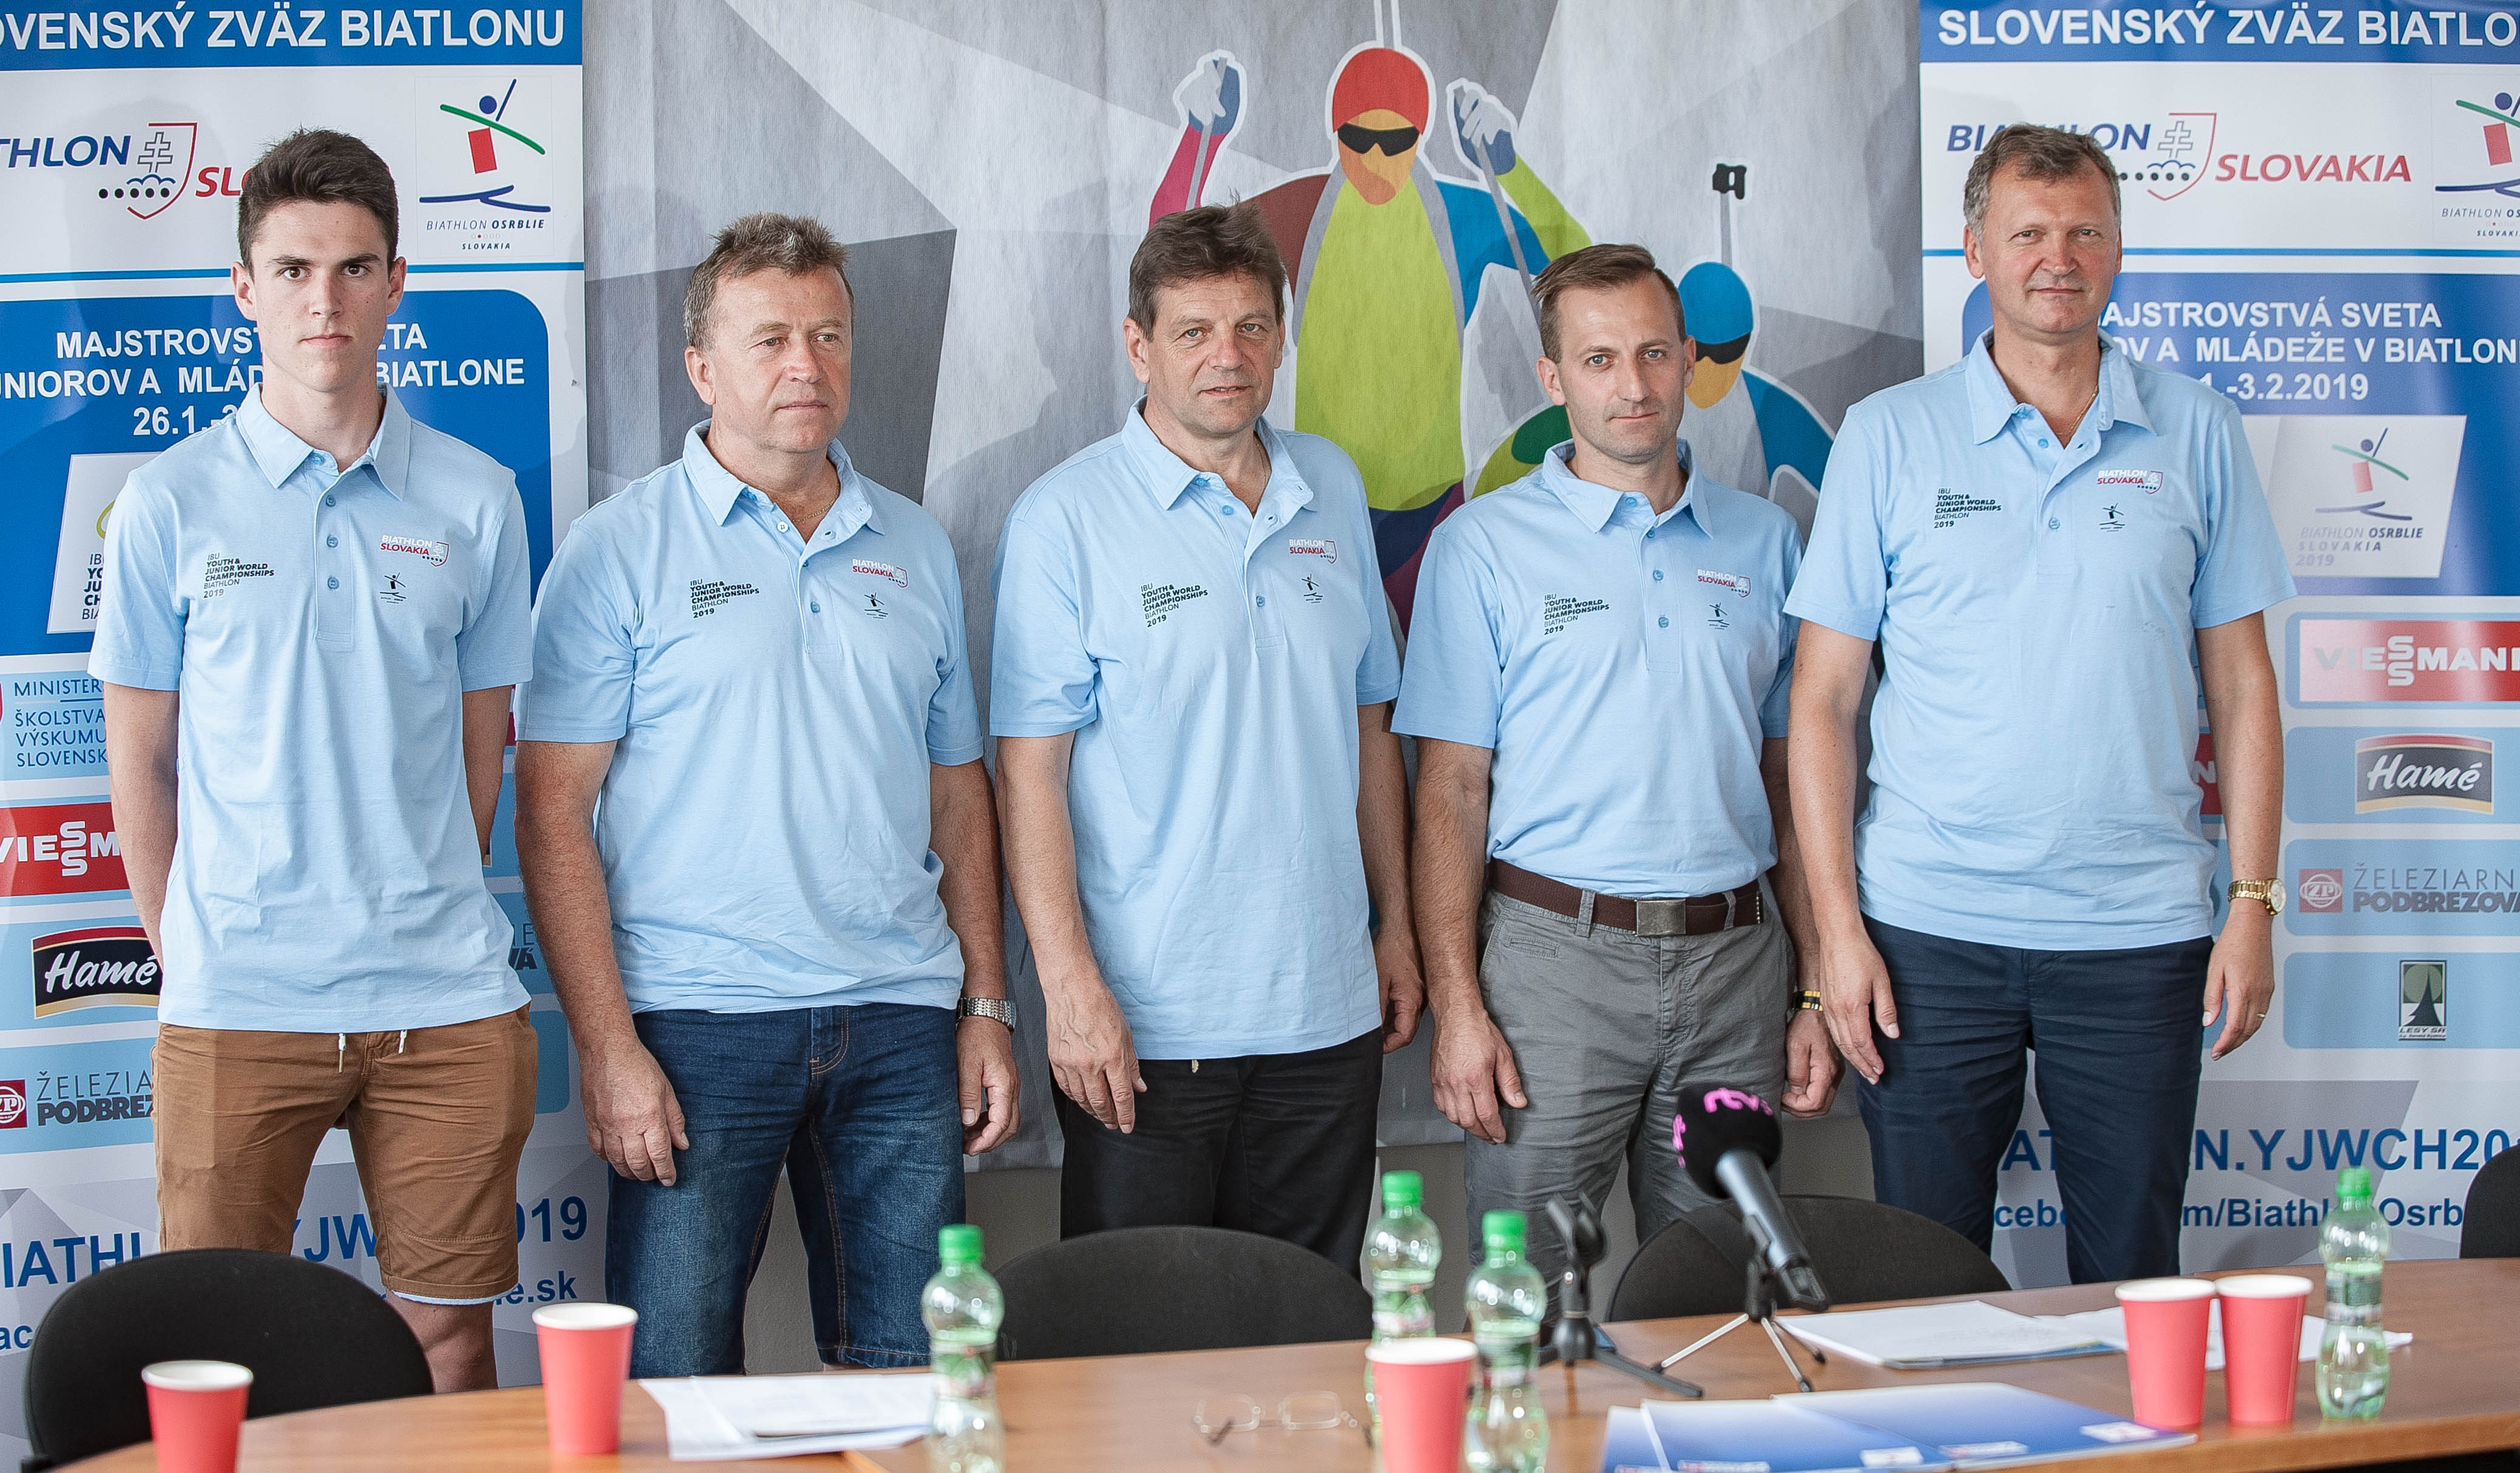 Press conference about the upcoming  Youth and Junior World Championships